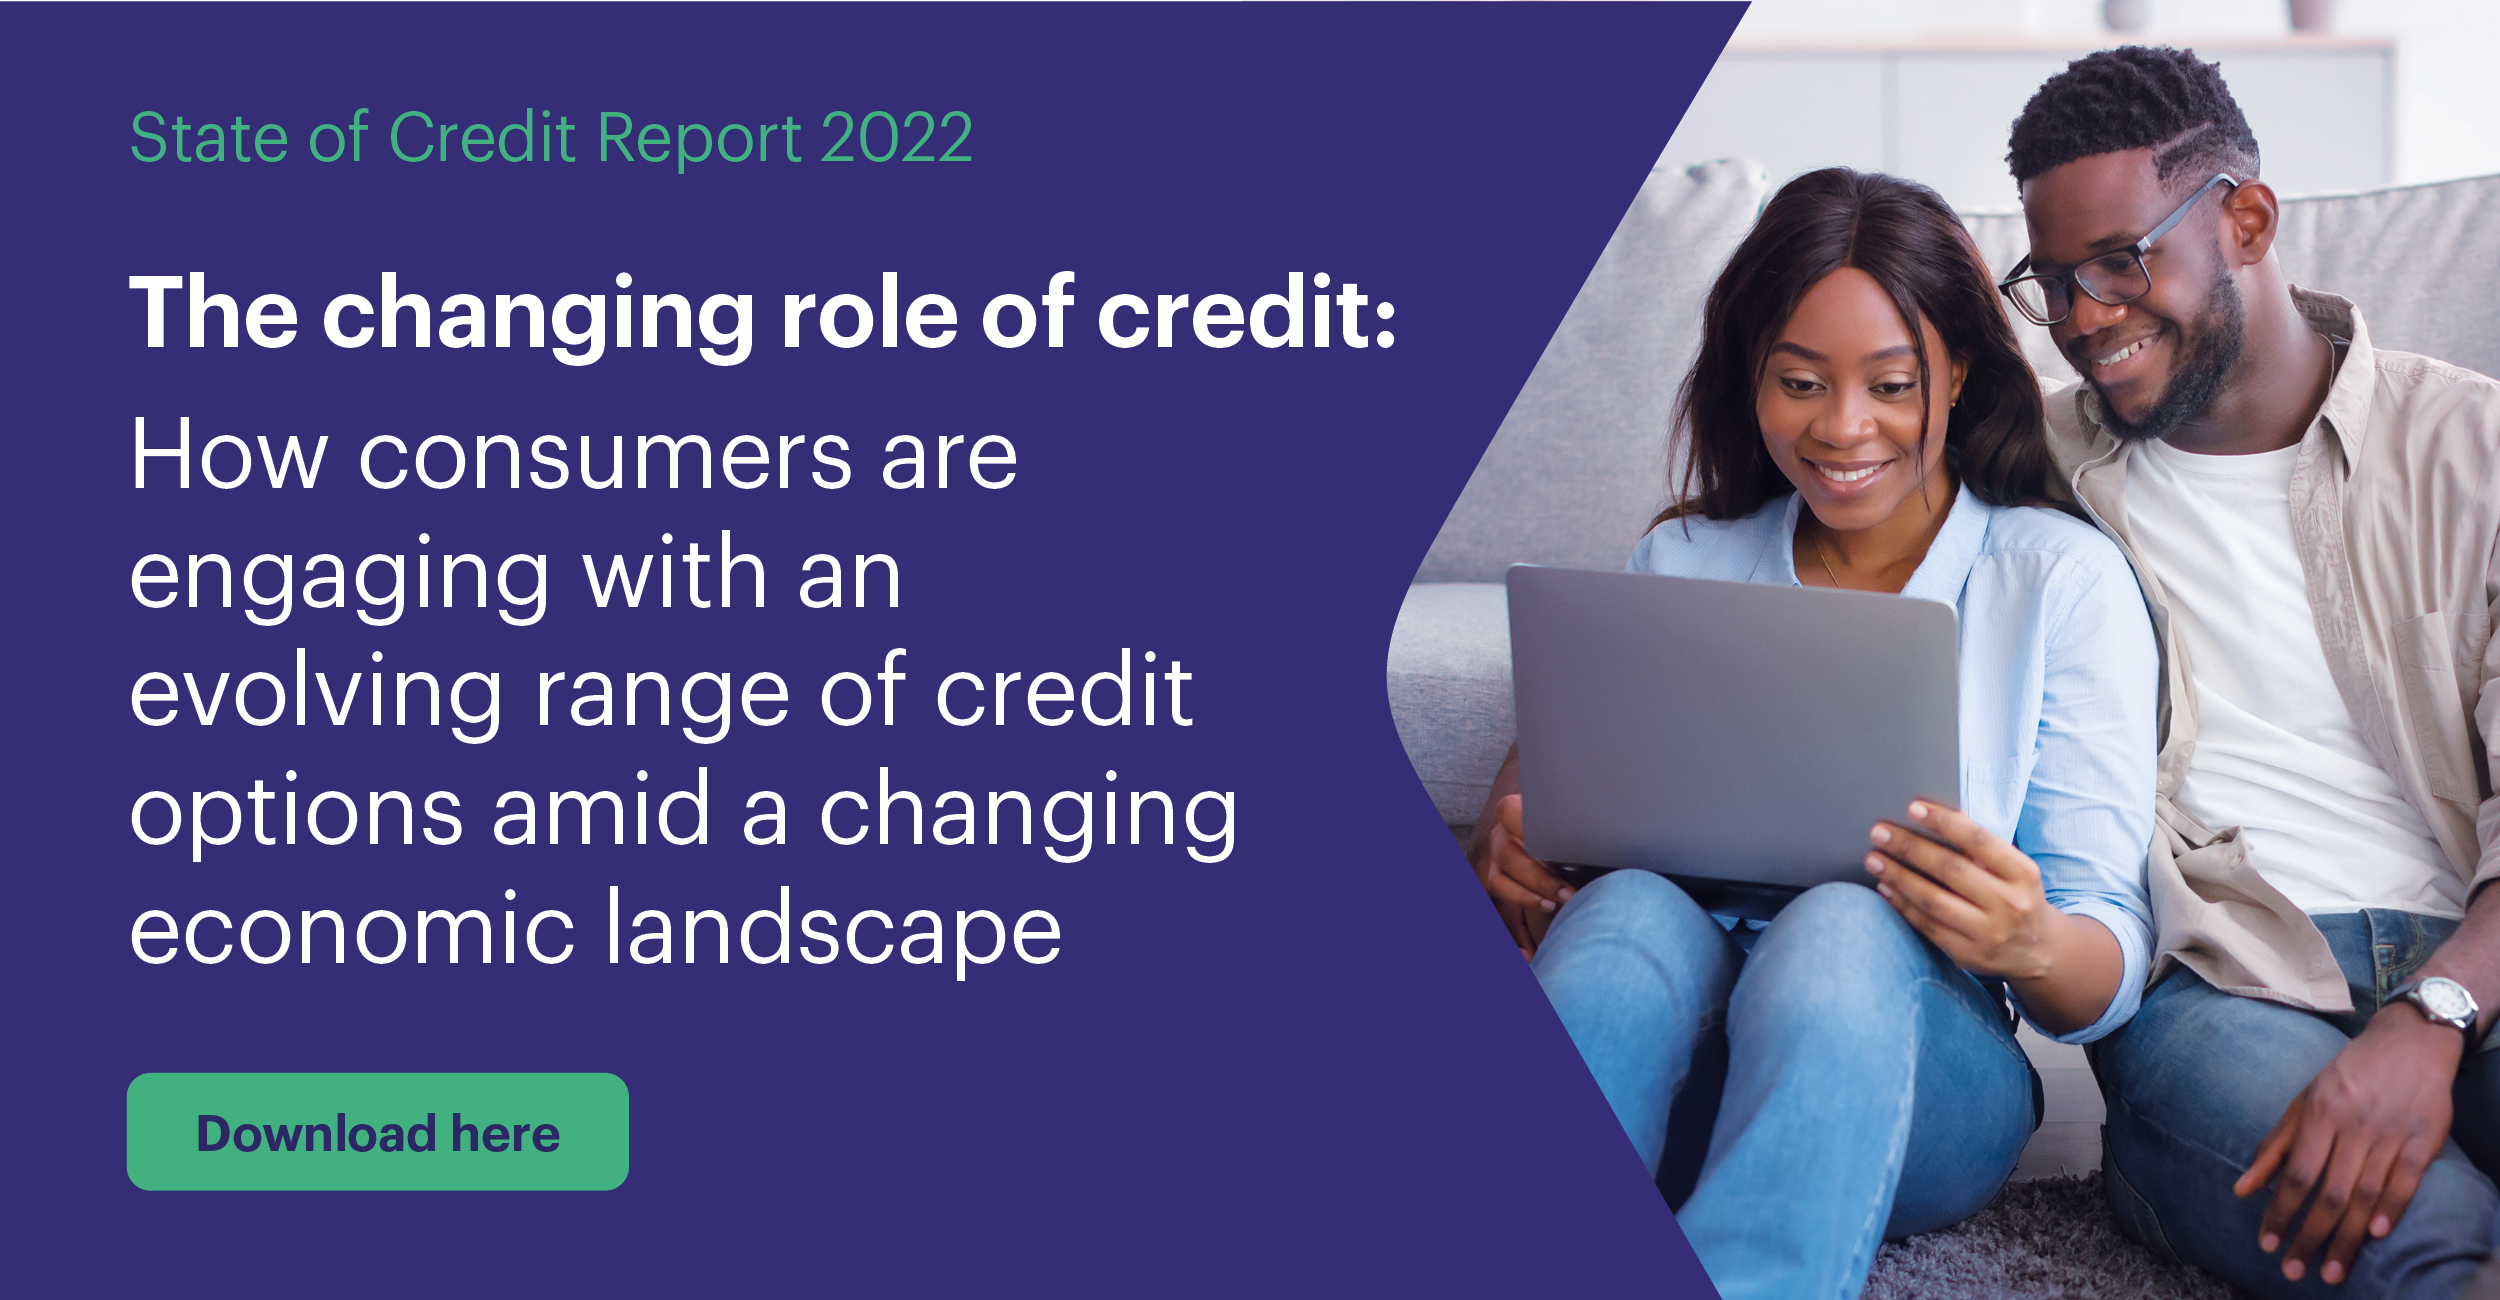 State of credit report 2022